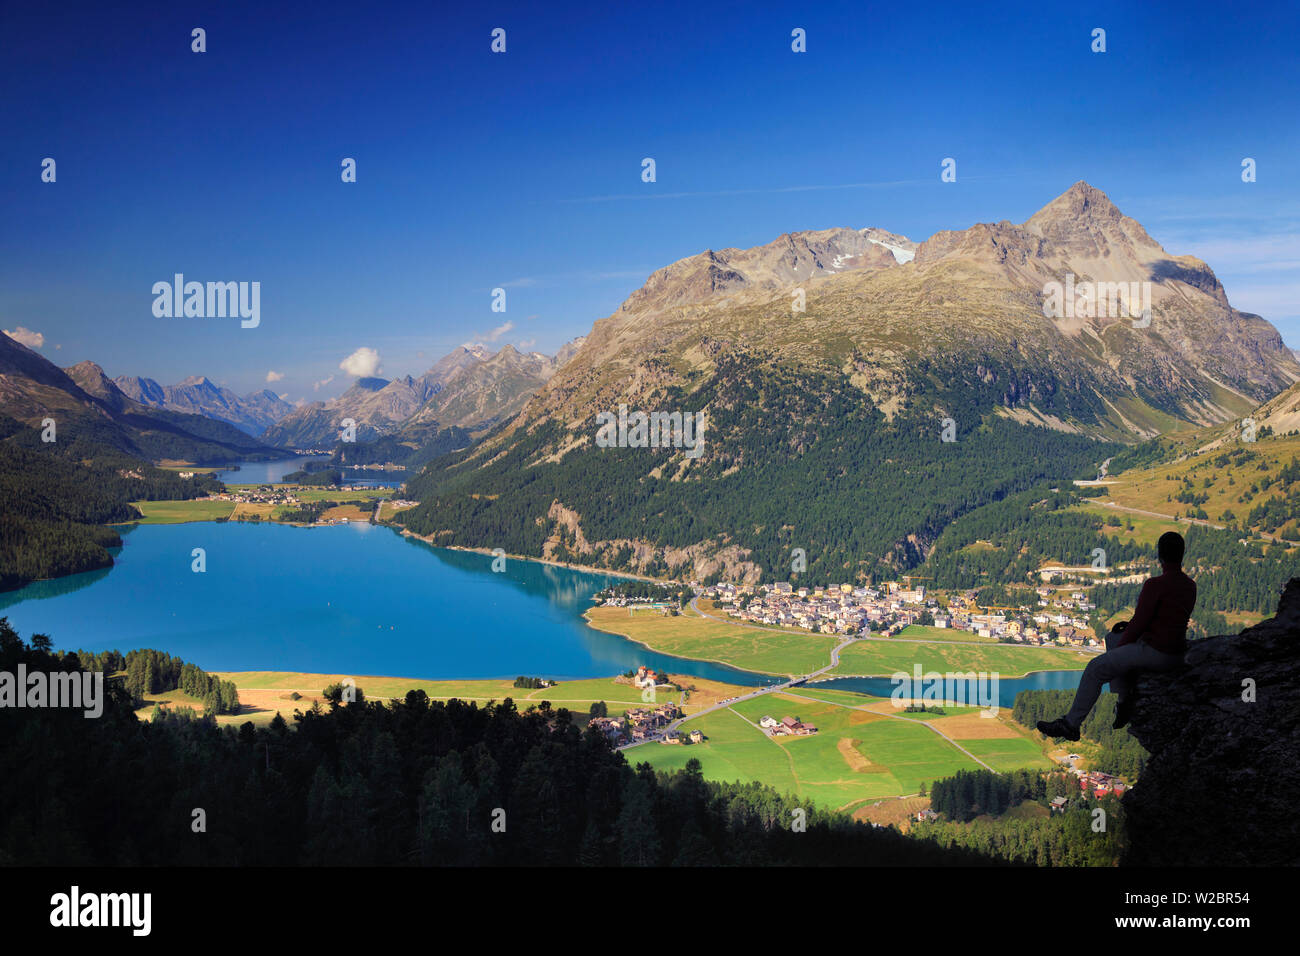 Switzerland, Graubunden, Upper Engadine, St. Moritz, elevated view of the valley and lakes (MR) Stock Photo